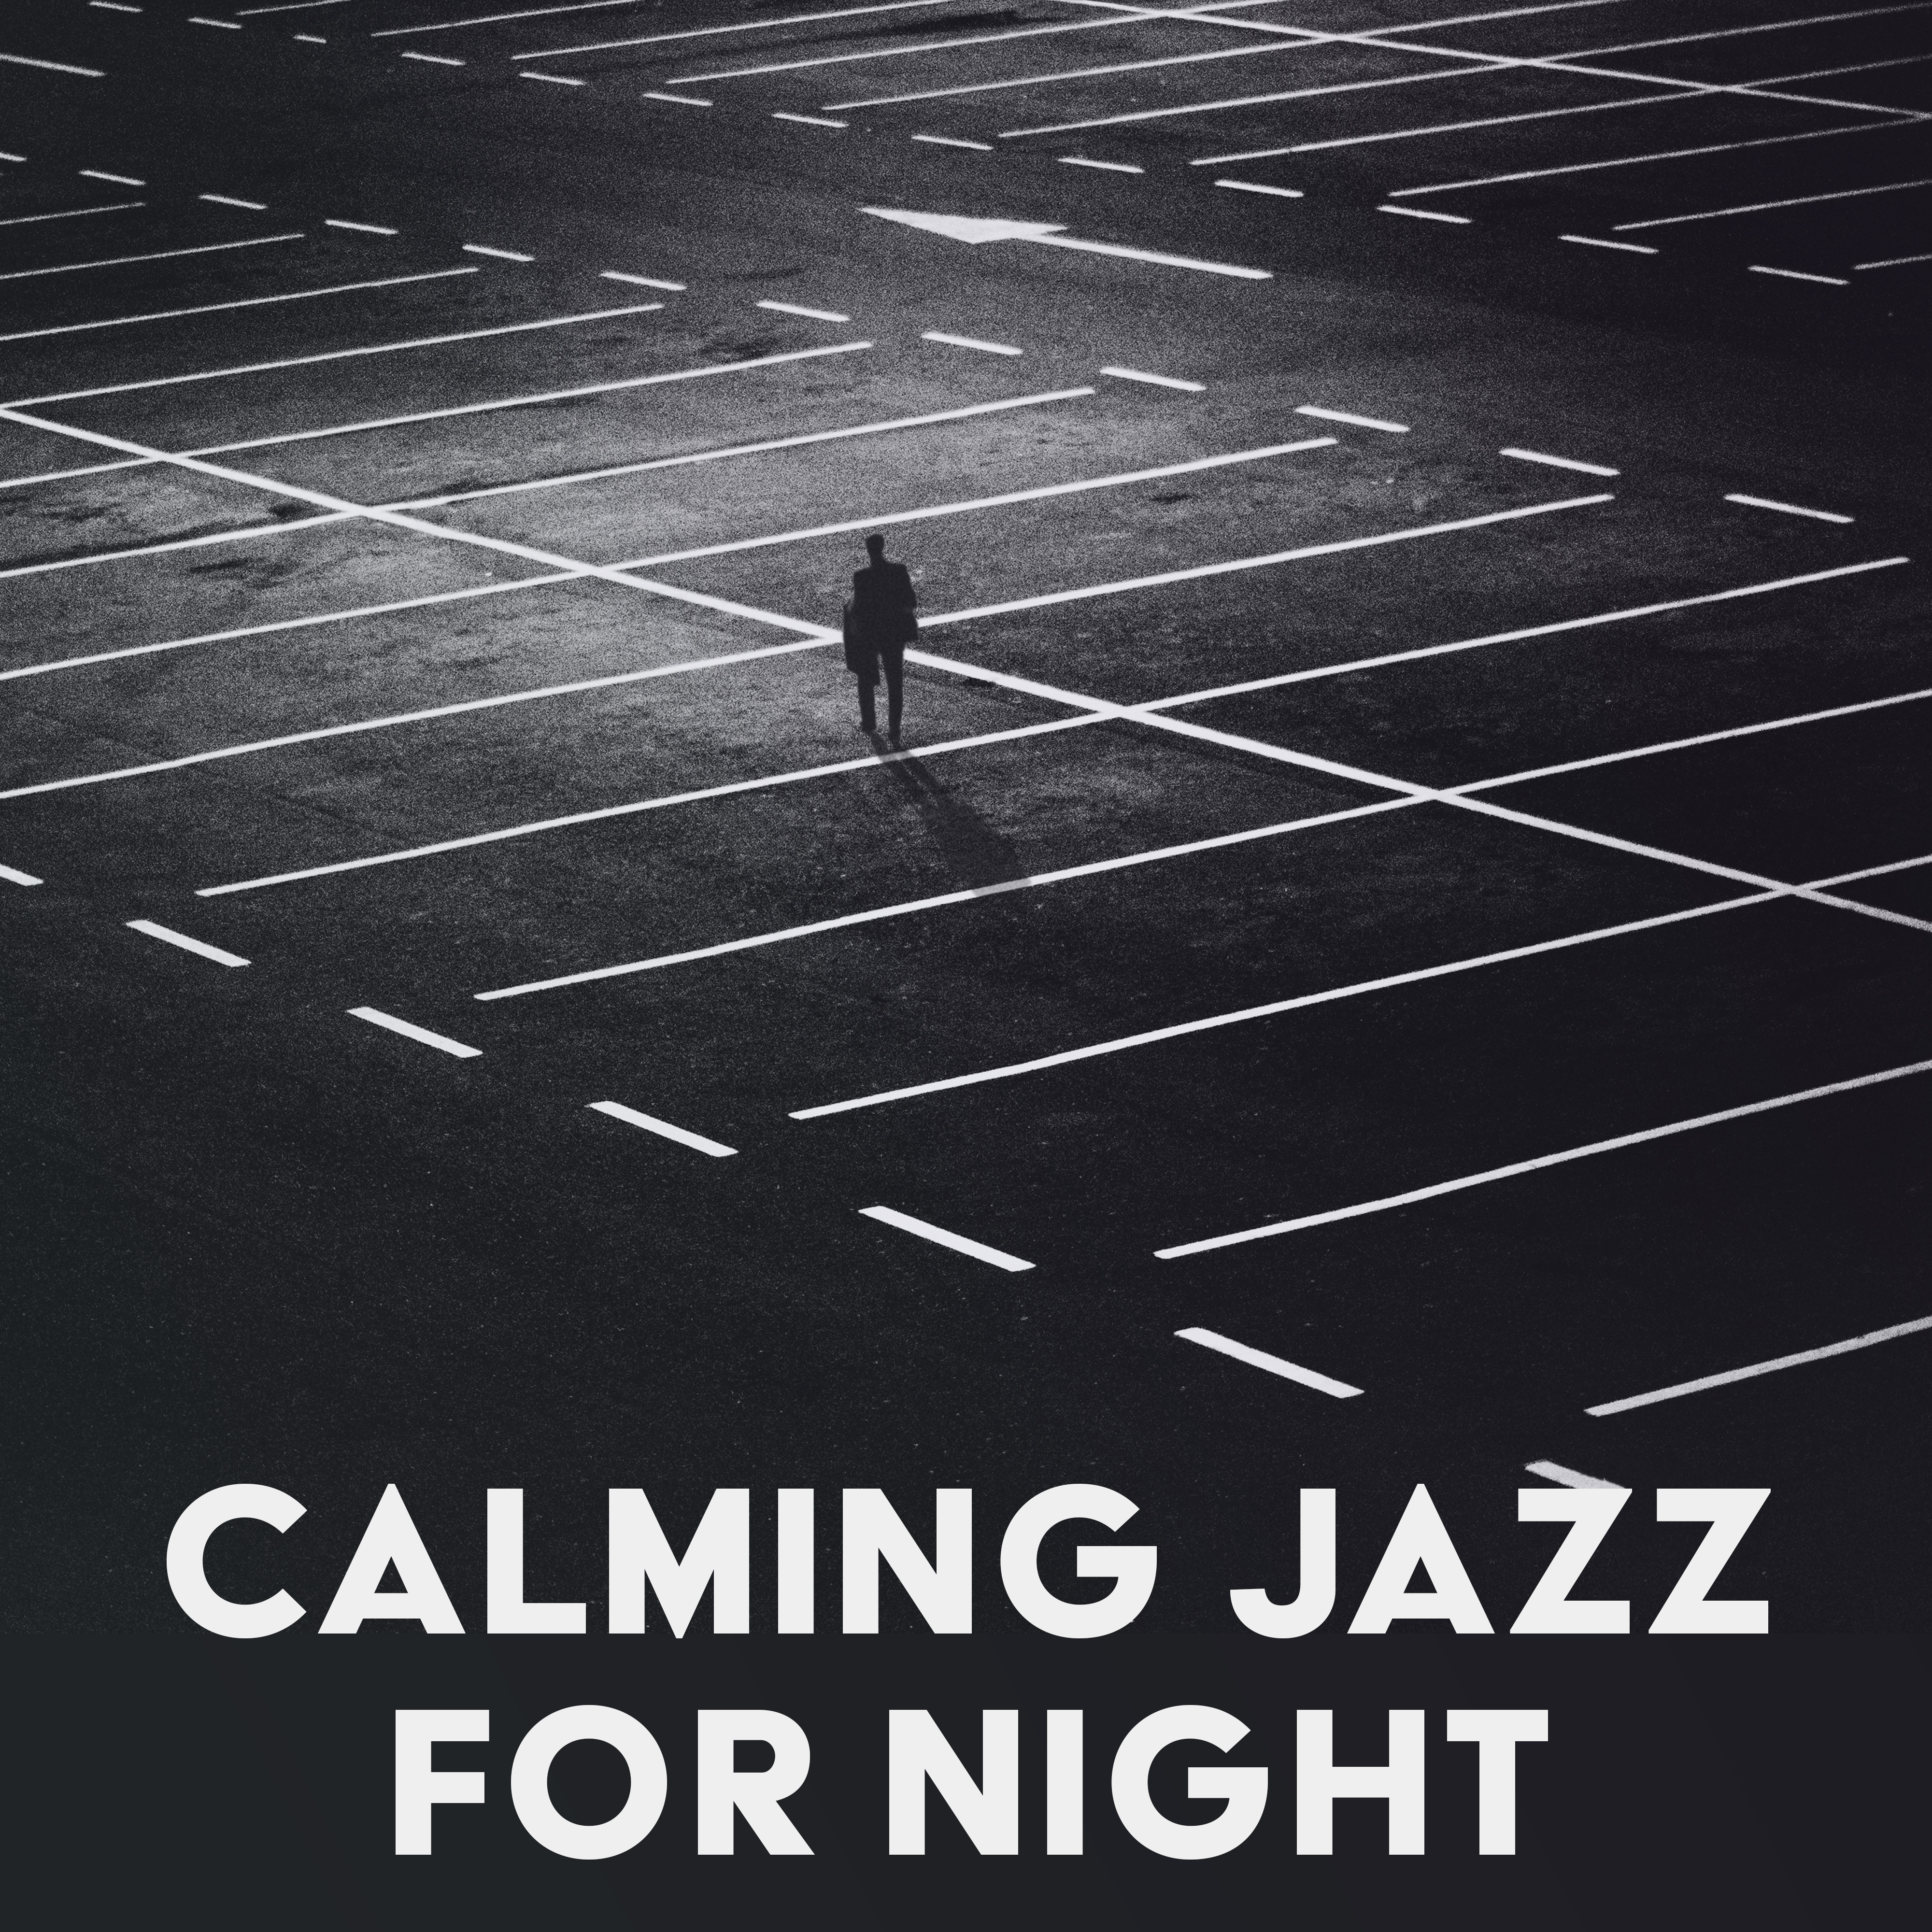 Calming Jazz for Night – Smooth Sounds, Relaxing Night Jazz, Easy Listening, Stress Free, Rest with Jazz